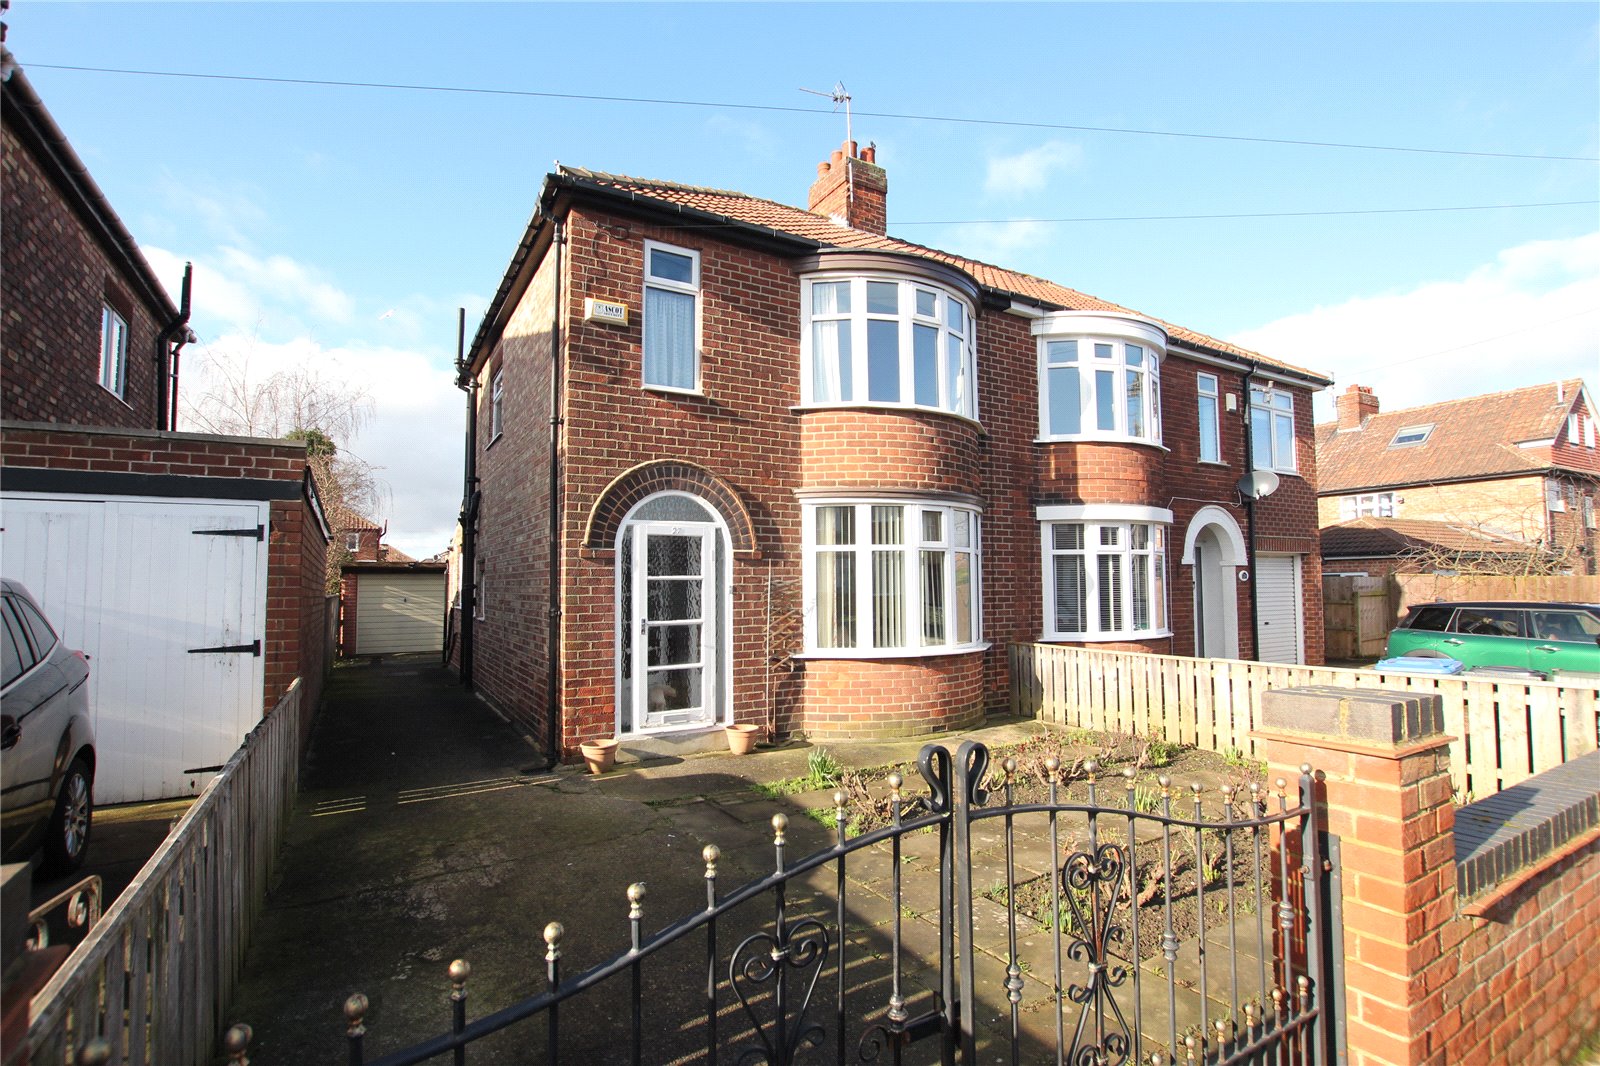 3 bed house for sale in Ridley Avenue, Acklam - Property Image 1